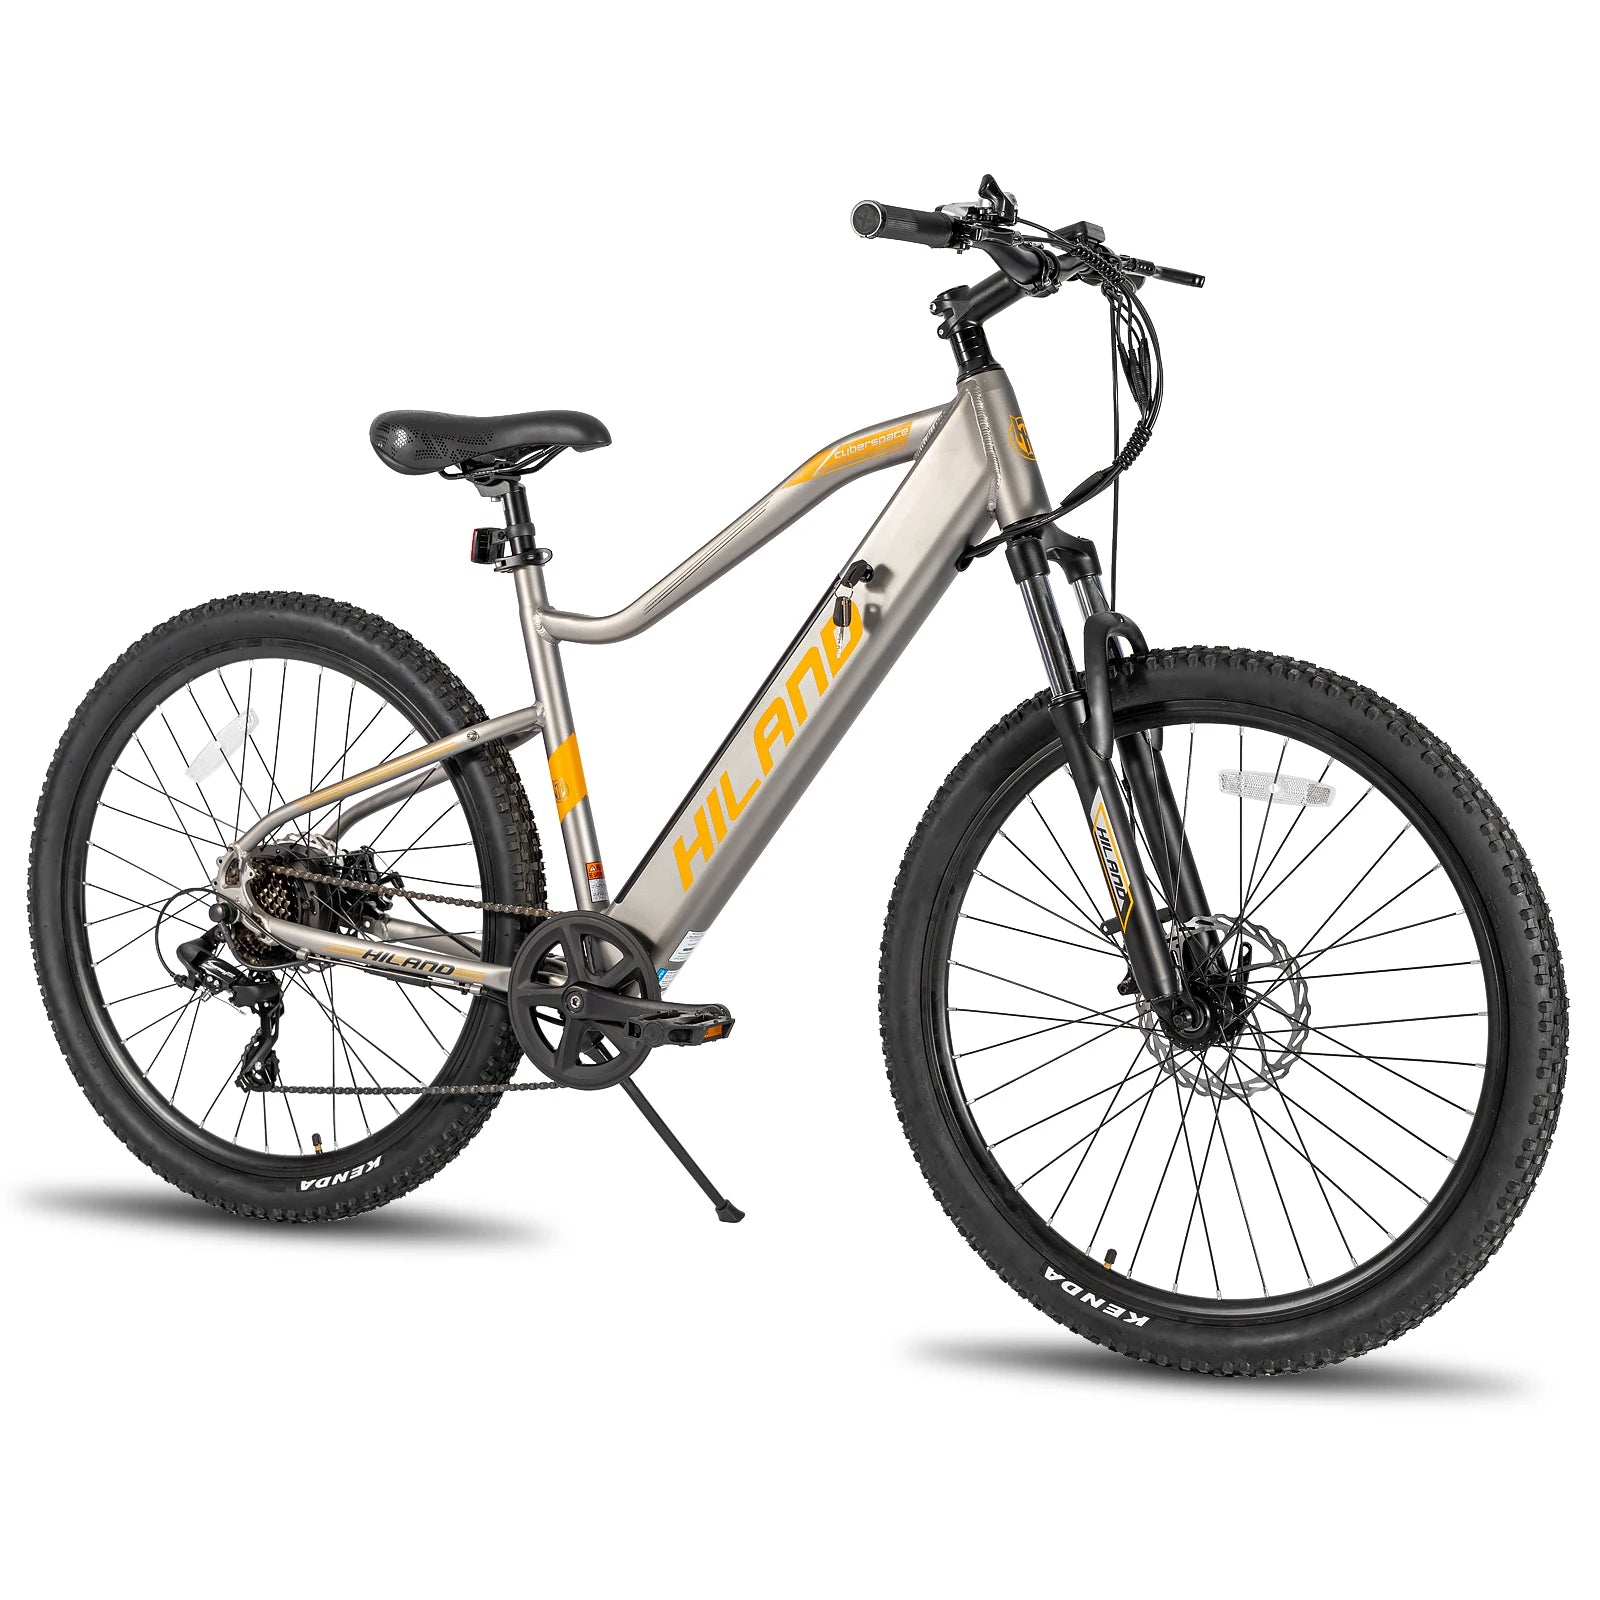 EPIC 750W Power - The Ultimate 26-Inch Electric Mountain Bike